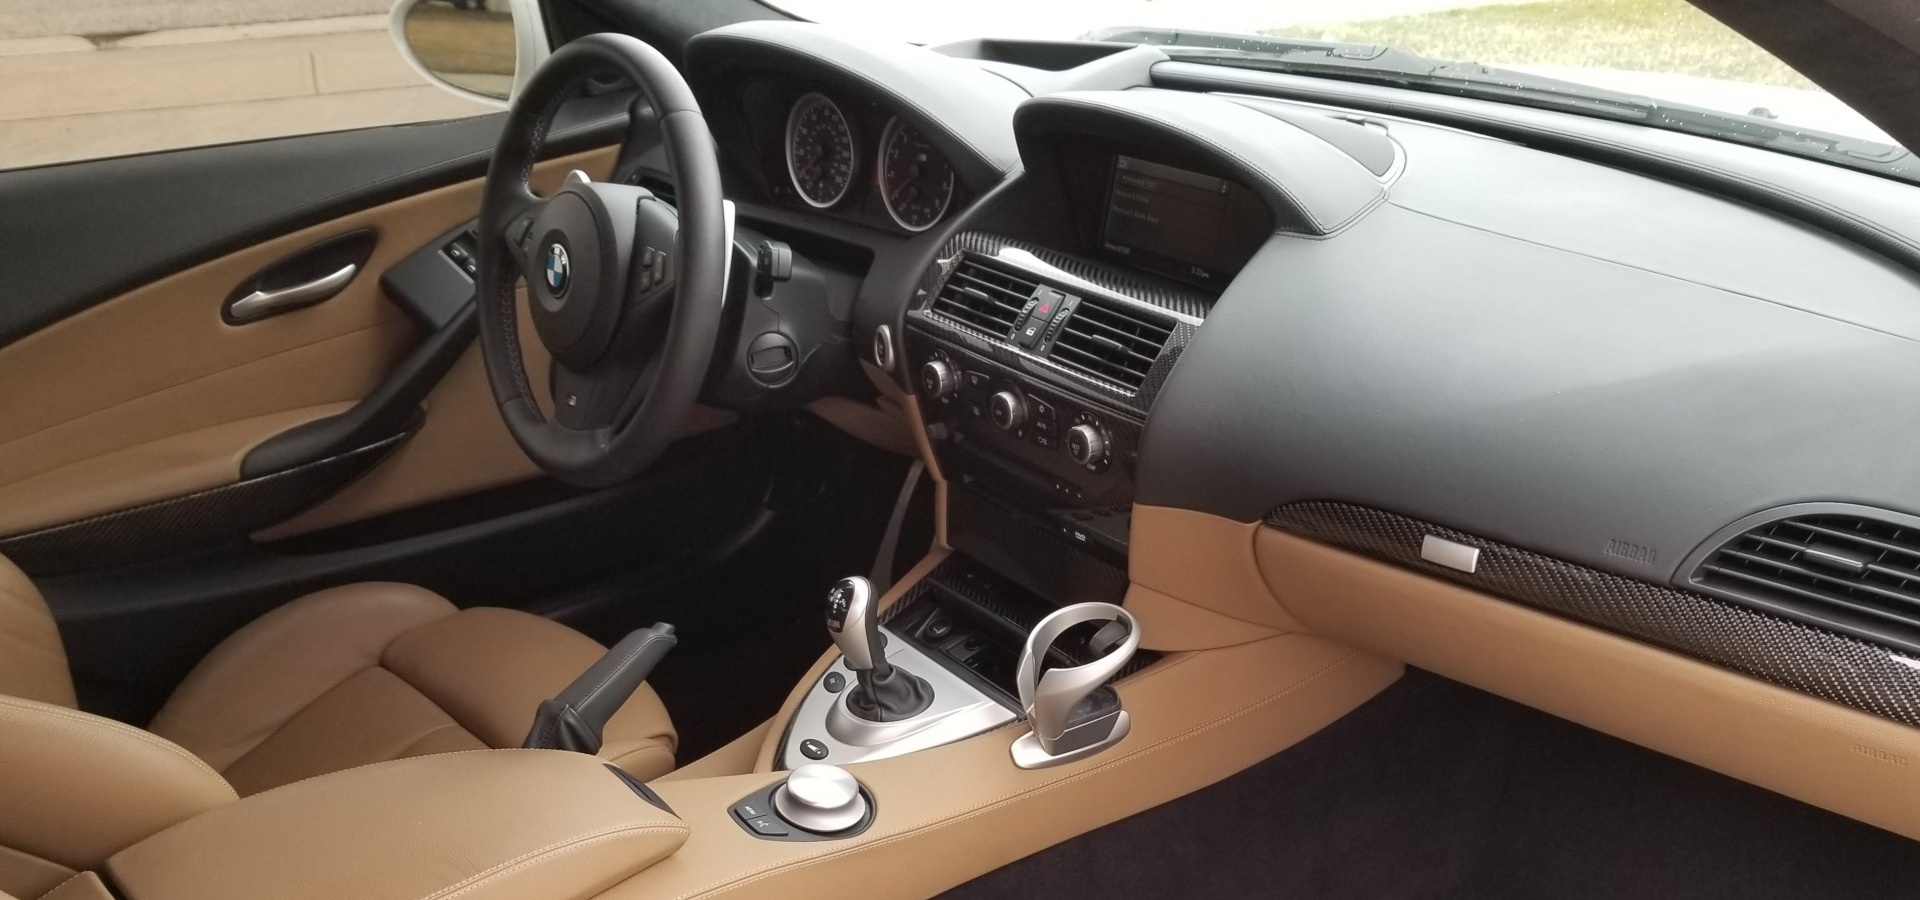 07 Bmw M6 With 9k Miles Might Actually Be Worth 30k Asking Price Carscoops